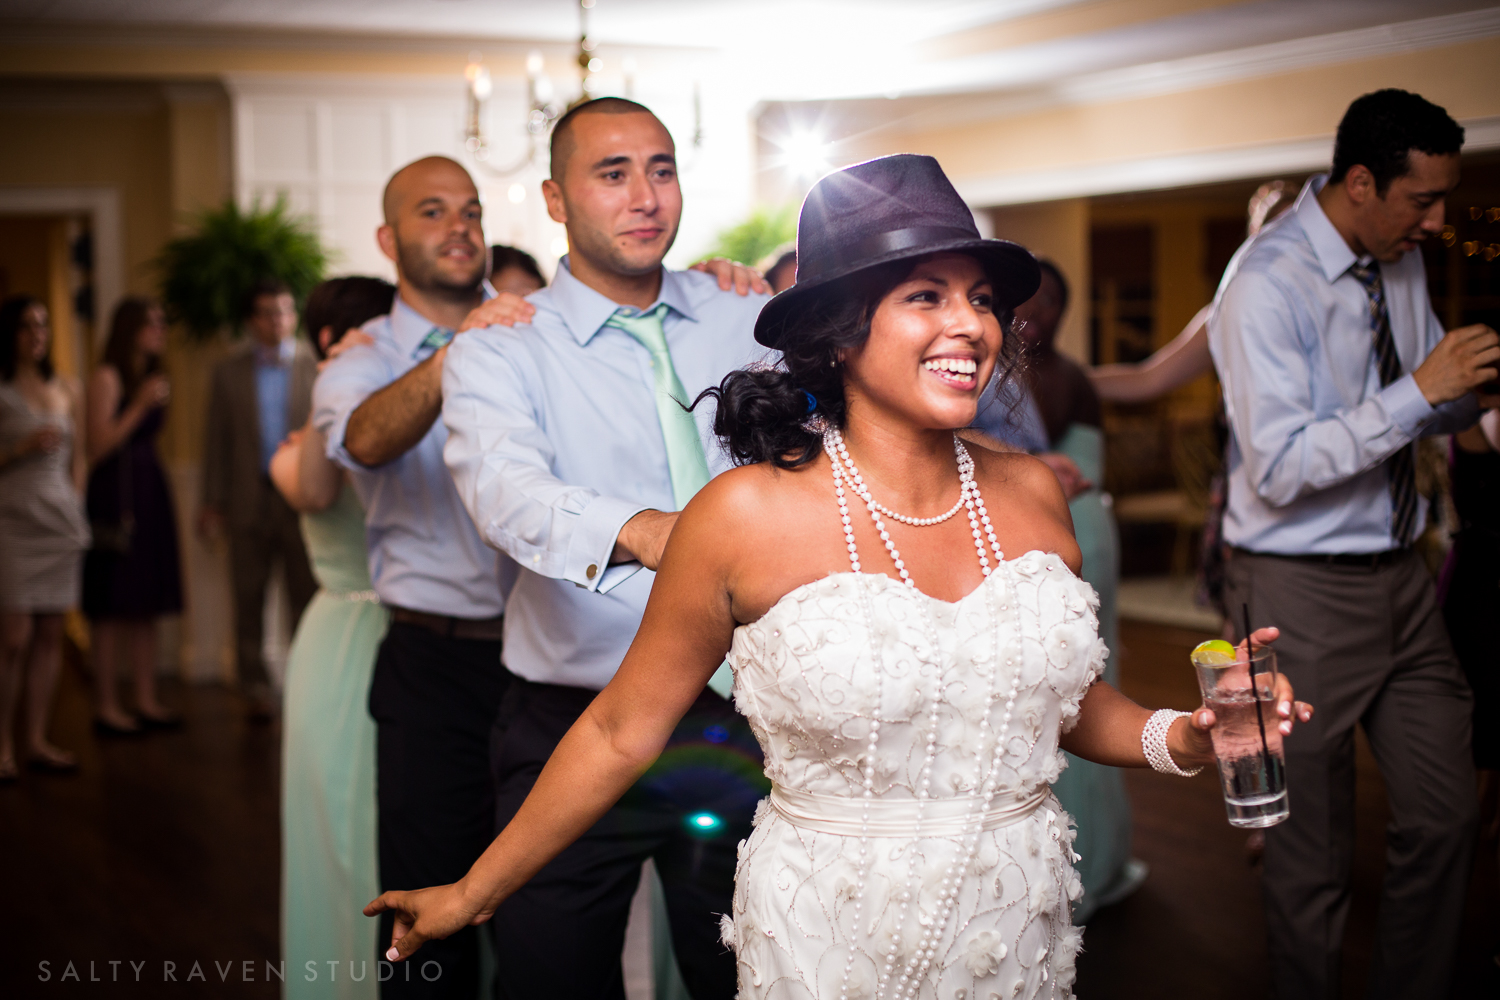 A woman dances at her wedding reception showing real moments and a documentary wedding photography style.